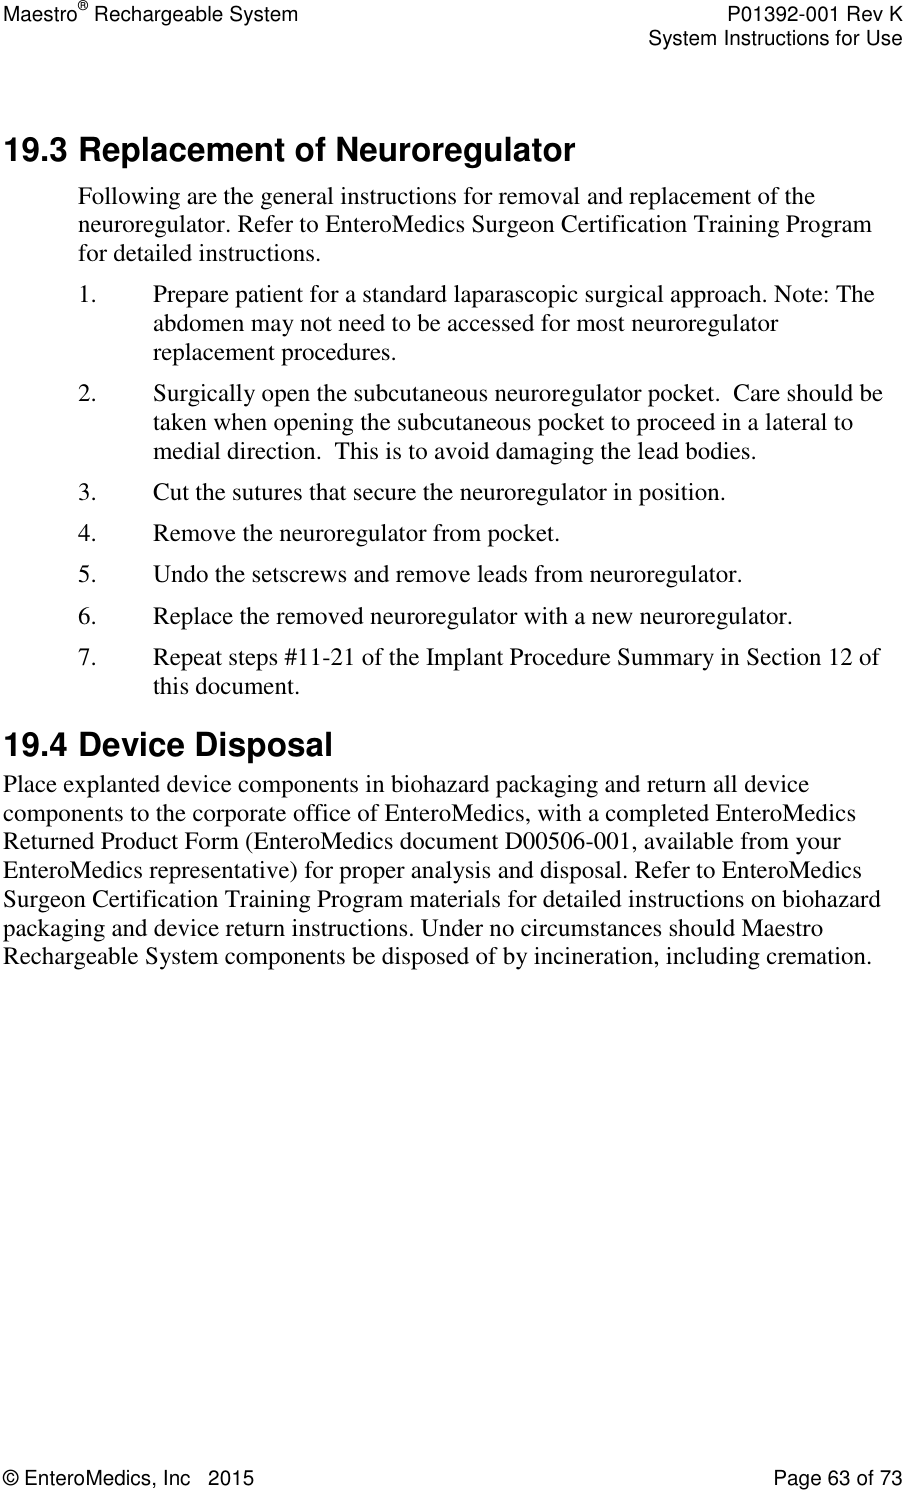 Maestro® Rechargeable System    P01392-001 Rev K     System Instructions for Use  © EnteroMedics, Inc   2015  Page 63 of 73   19.3 Replacement of Neuroregulator Following are the general instructions for removal and replacement of the neuroregulator. Refer to EnteroMedics Surgeon Certification Training Program for detailed instructions.  1. Prepare patient for a standard laparascopic surgical approach. Note: The abdomen may not need to be accessed for most neuroregulator replacement procedures. 2. Surgically open the subcutaneous neuroregulator pocket.  Care should be taken when opening the subcutaneous pocket to proceed in a lateral to medial direction.  This is to avoid damaging the lead bodies. 3. Cut the sutures that secure the neuroregulator in position. 4. Remove the neuroregulator from pocket. 5. Undo the setscrews and remove leads from neuroregulator. 6. Replace the removed neuroregulator with a new neuroregulator. 7. Repeat steps #11-21 of the Implant Procedure Summary in Section 12 of this document. 19.4 Device Disposal Place explanted device components in biohazard packaging and return all device components to the corporate office of EnteroMedics, with a completed EnteroMedics Returned Product Form (EnteroMedics document D00506-001, available from your EnteroMedics representative) for proper analysis and disposal. Refer to EnteroMedics Surgeon Certification Training Program materials for detailed instructions on biohazard packaging and device return instructions. Under no circumstances should Maestro Rechargeable System components be disposed of by incineration, including cremation. 